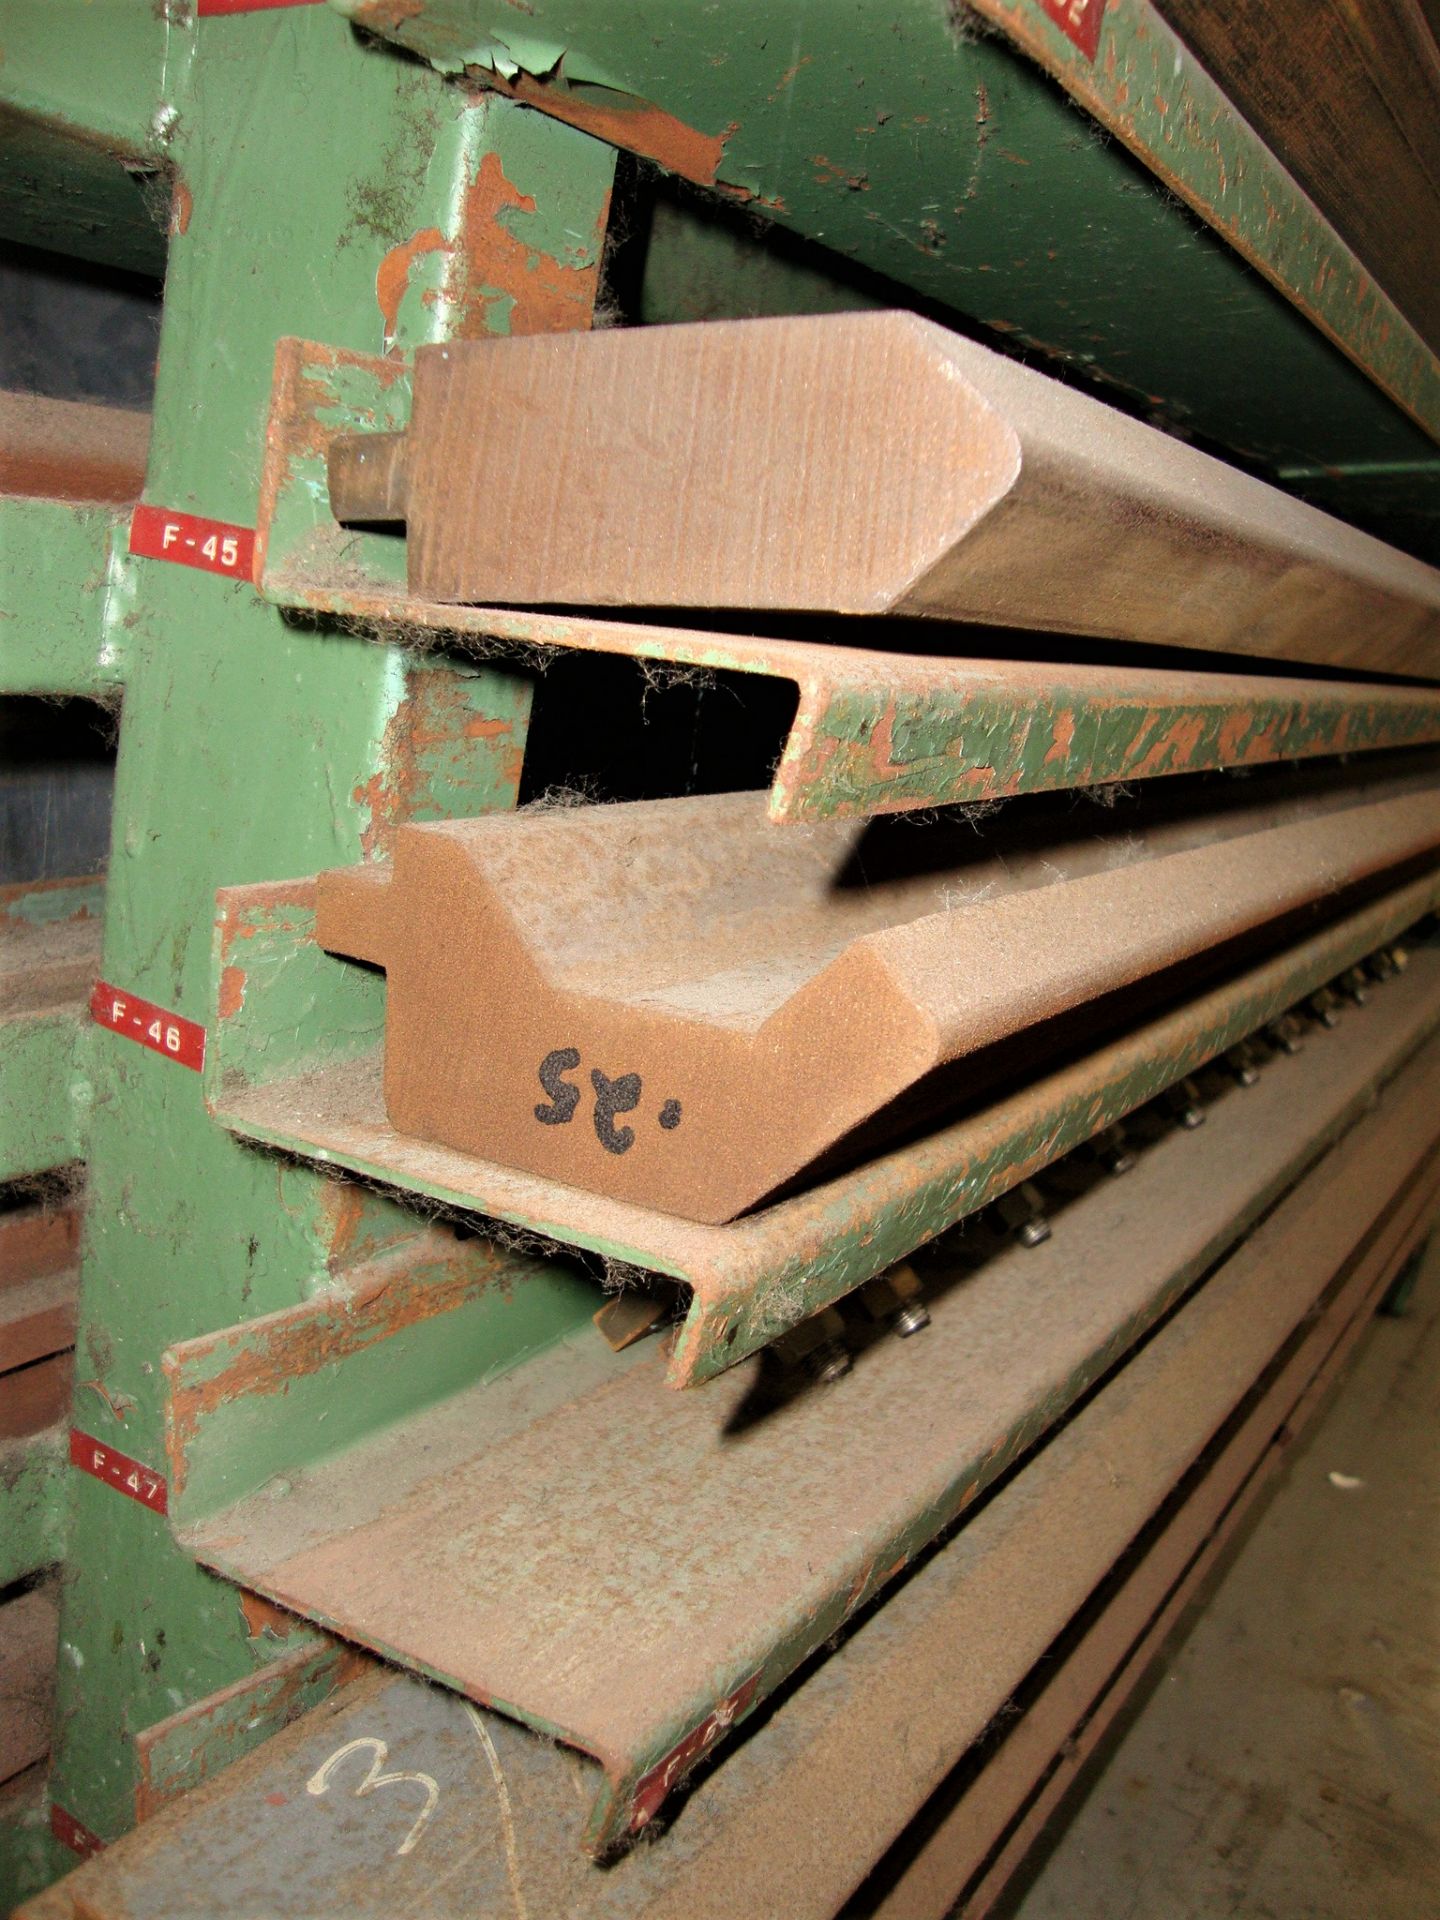 Lot of approx. 248 Assorted Press Brake Dies, up to 68" long Note-Rack NOT Included - Image 15 of 16